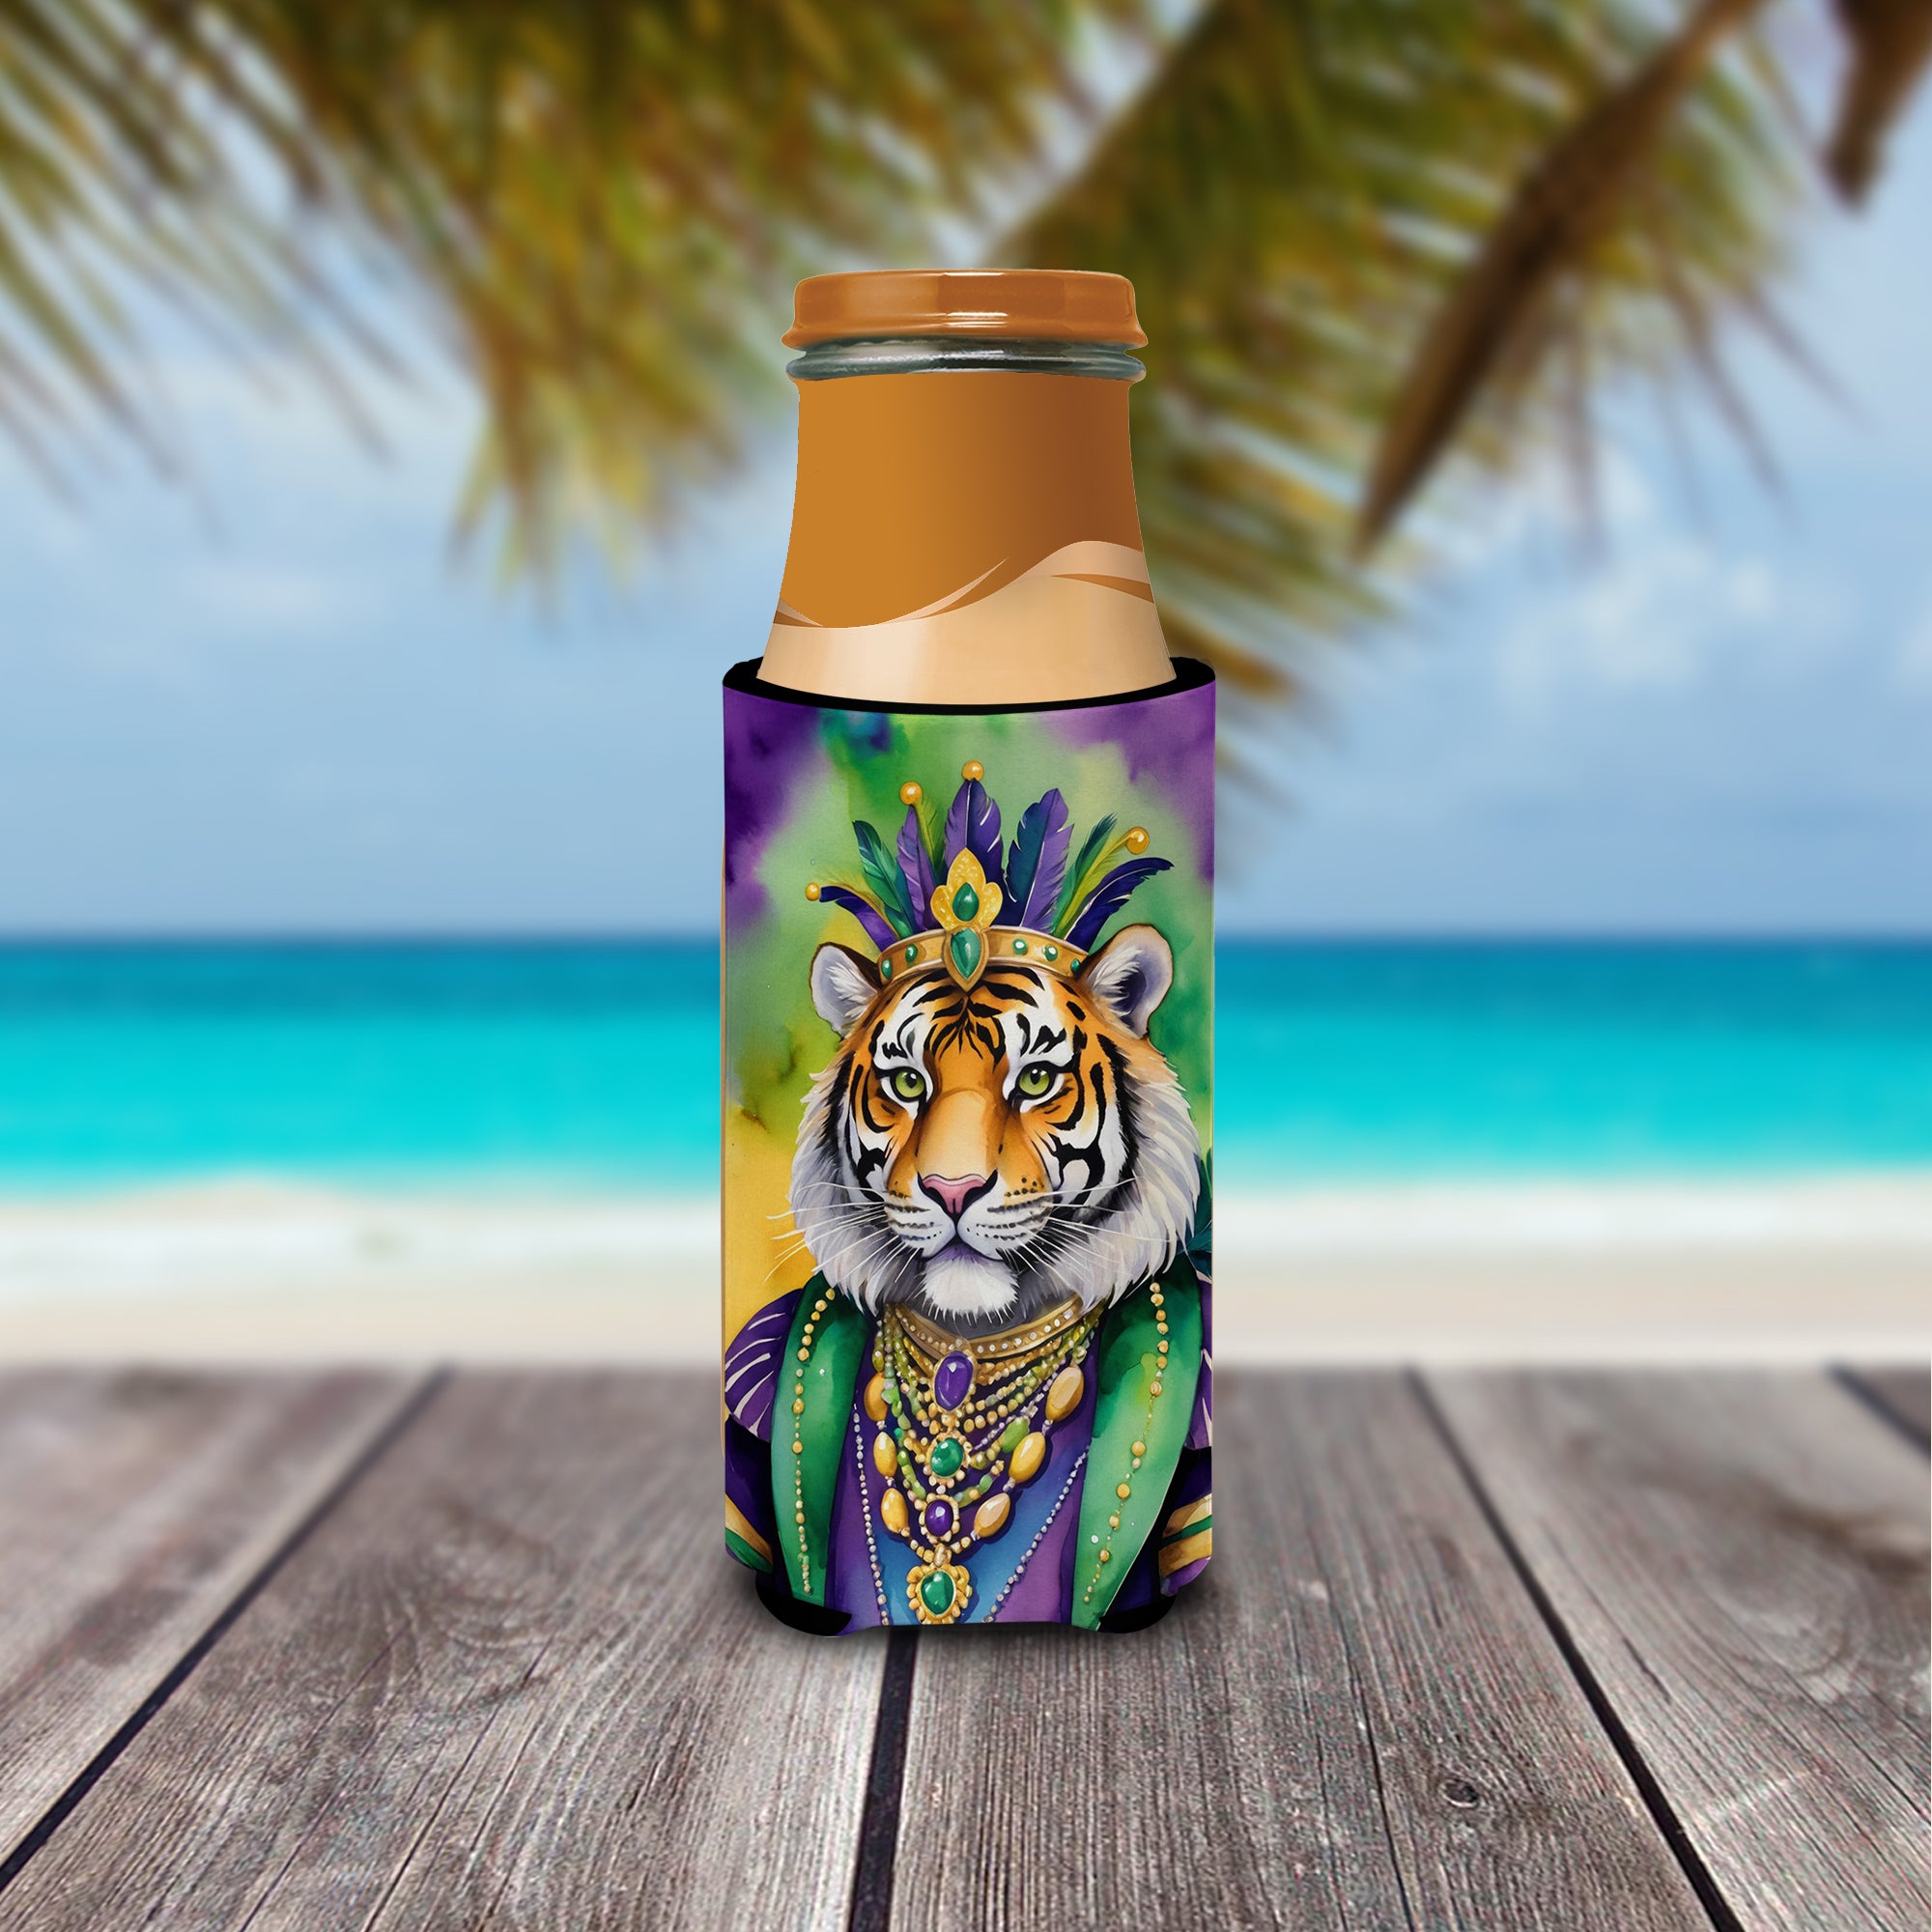 Tiger the King of Mardi Gras Hugger for Ultra Slim Cans